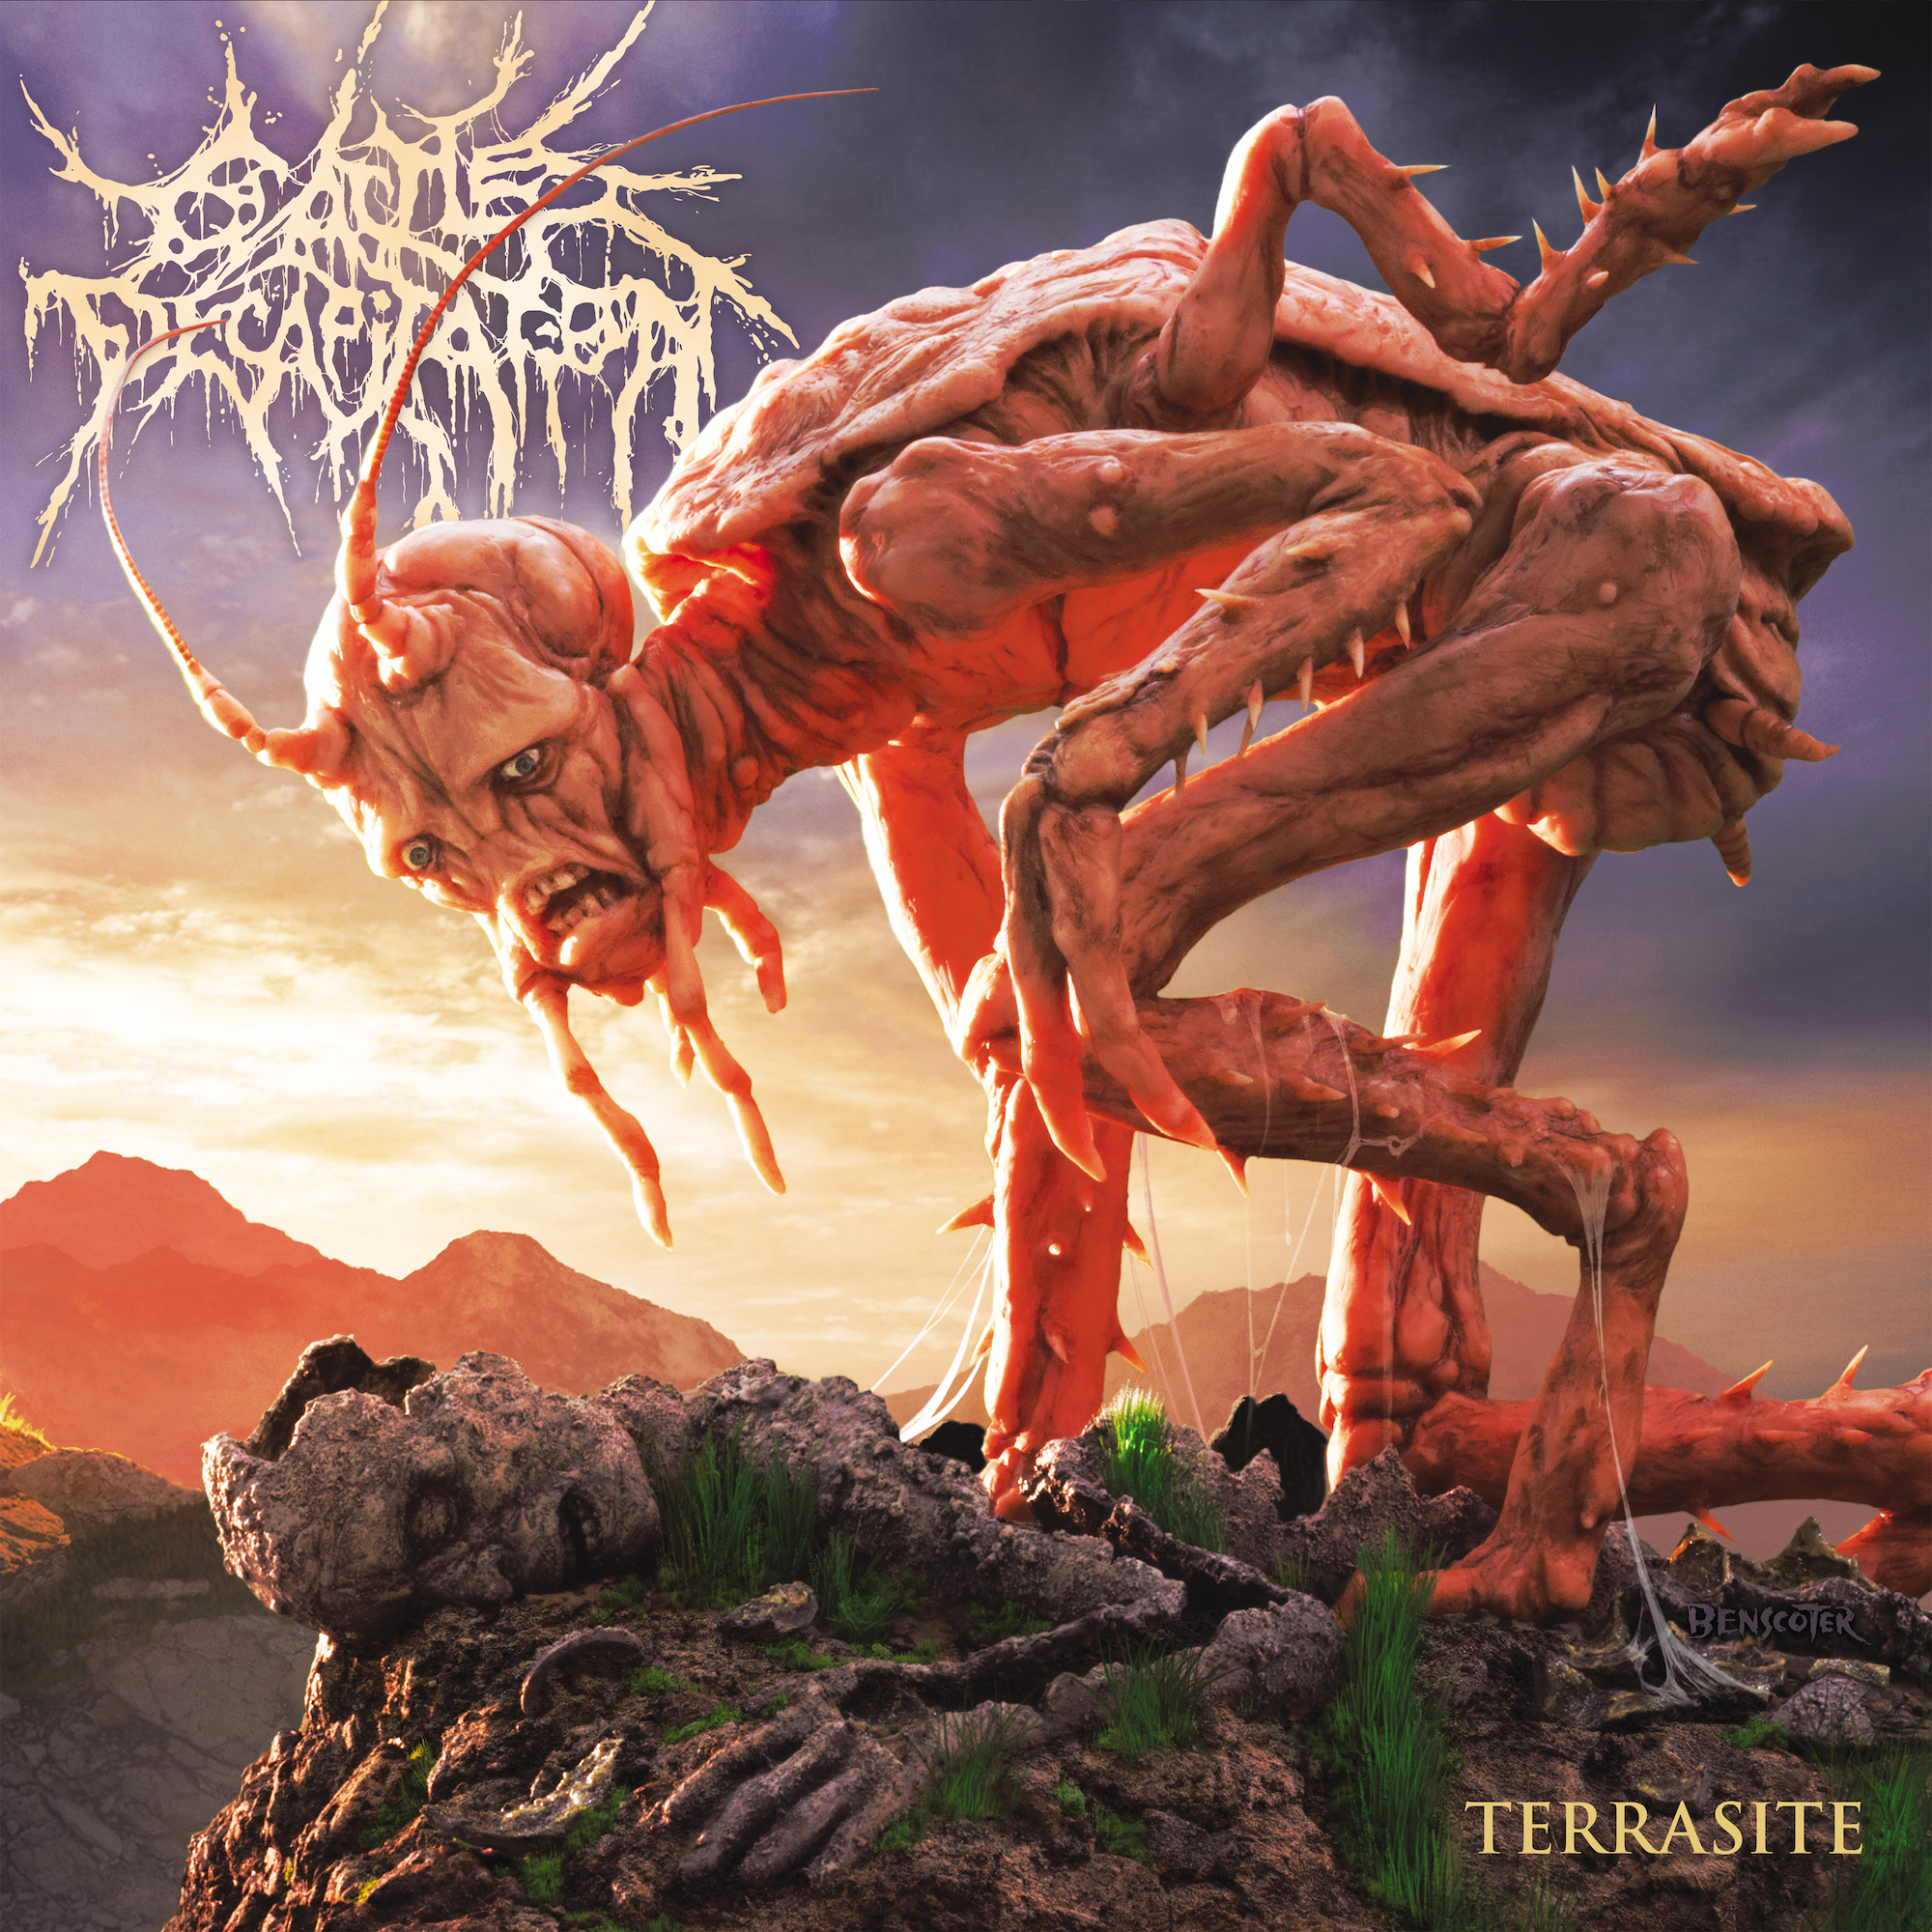 Album Review: "Terrasite" by Cattle Decapitation